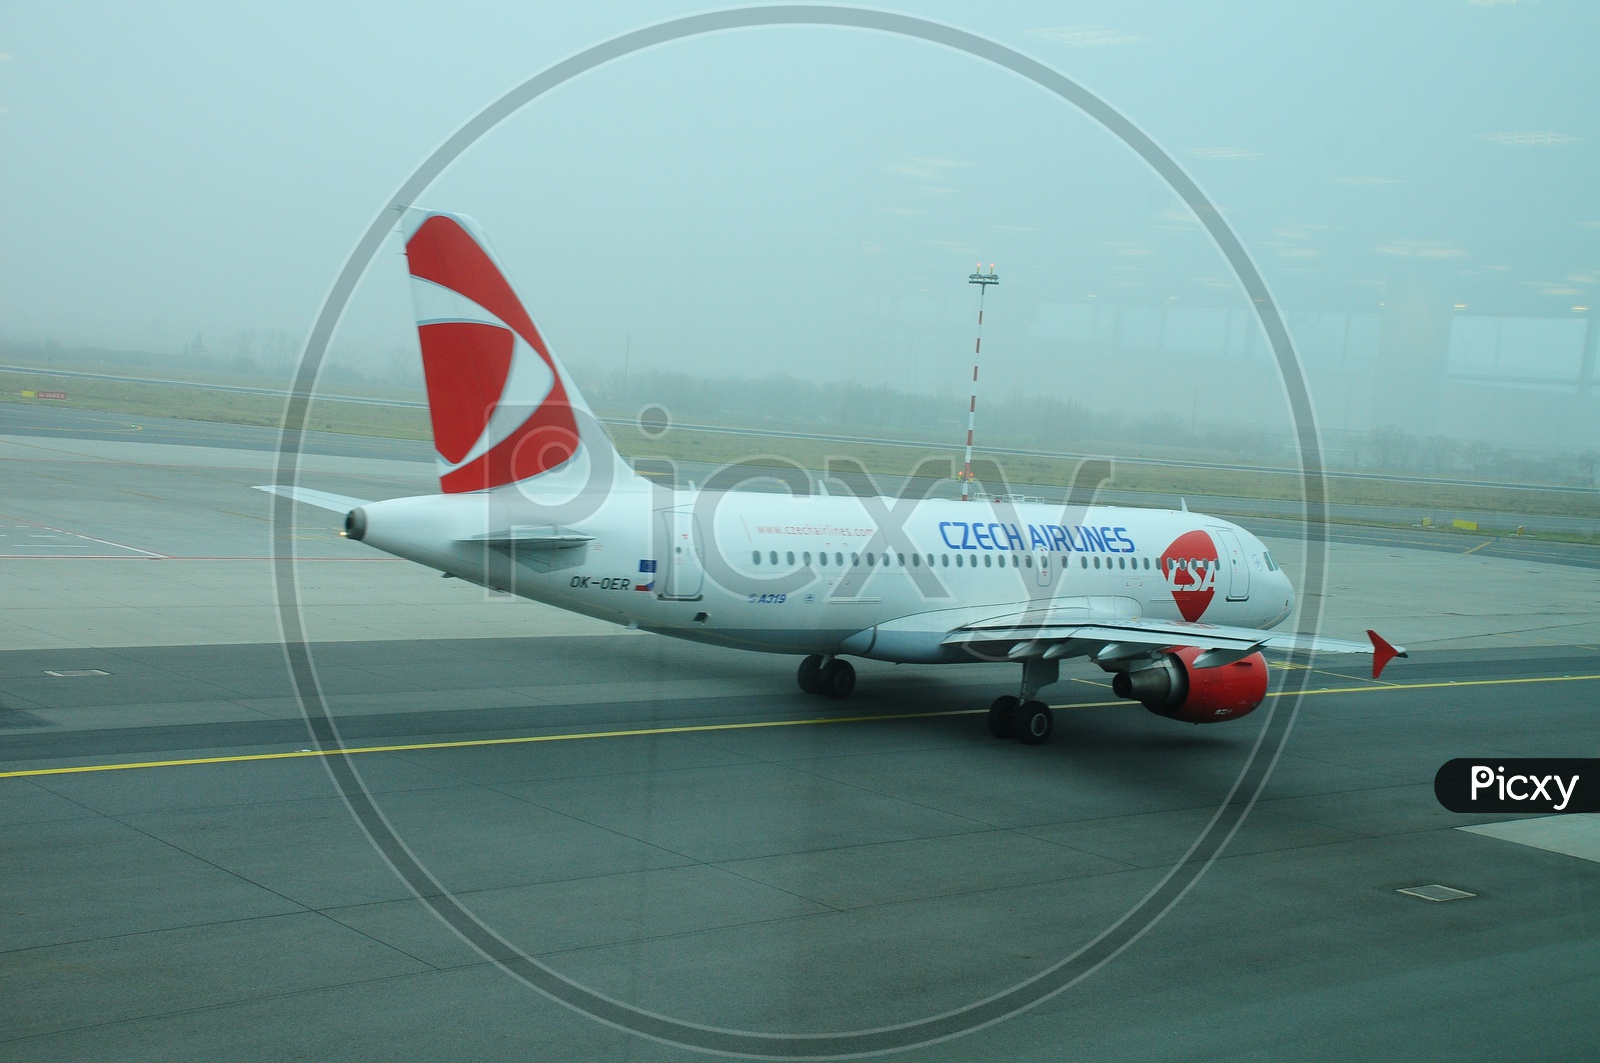 Czech Airlines flight moving on Runway